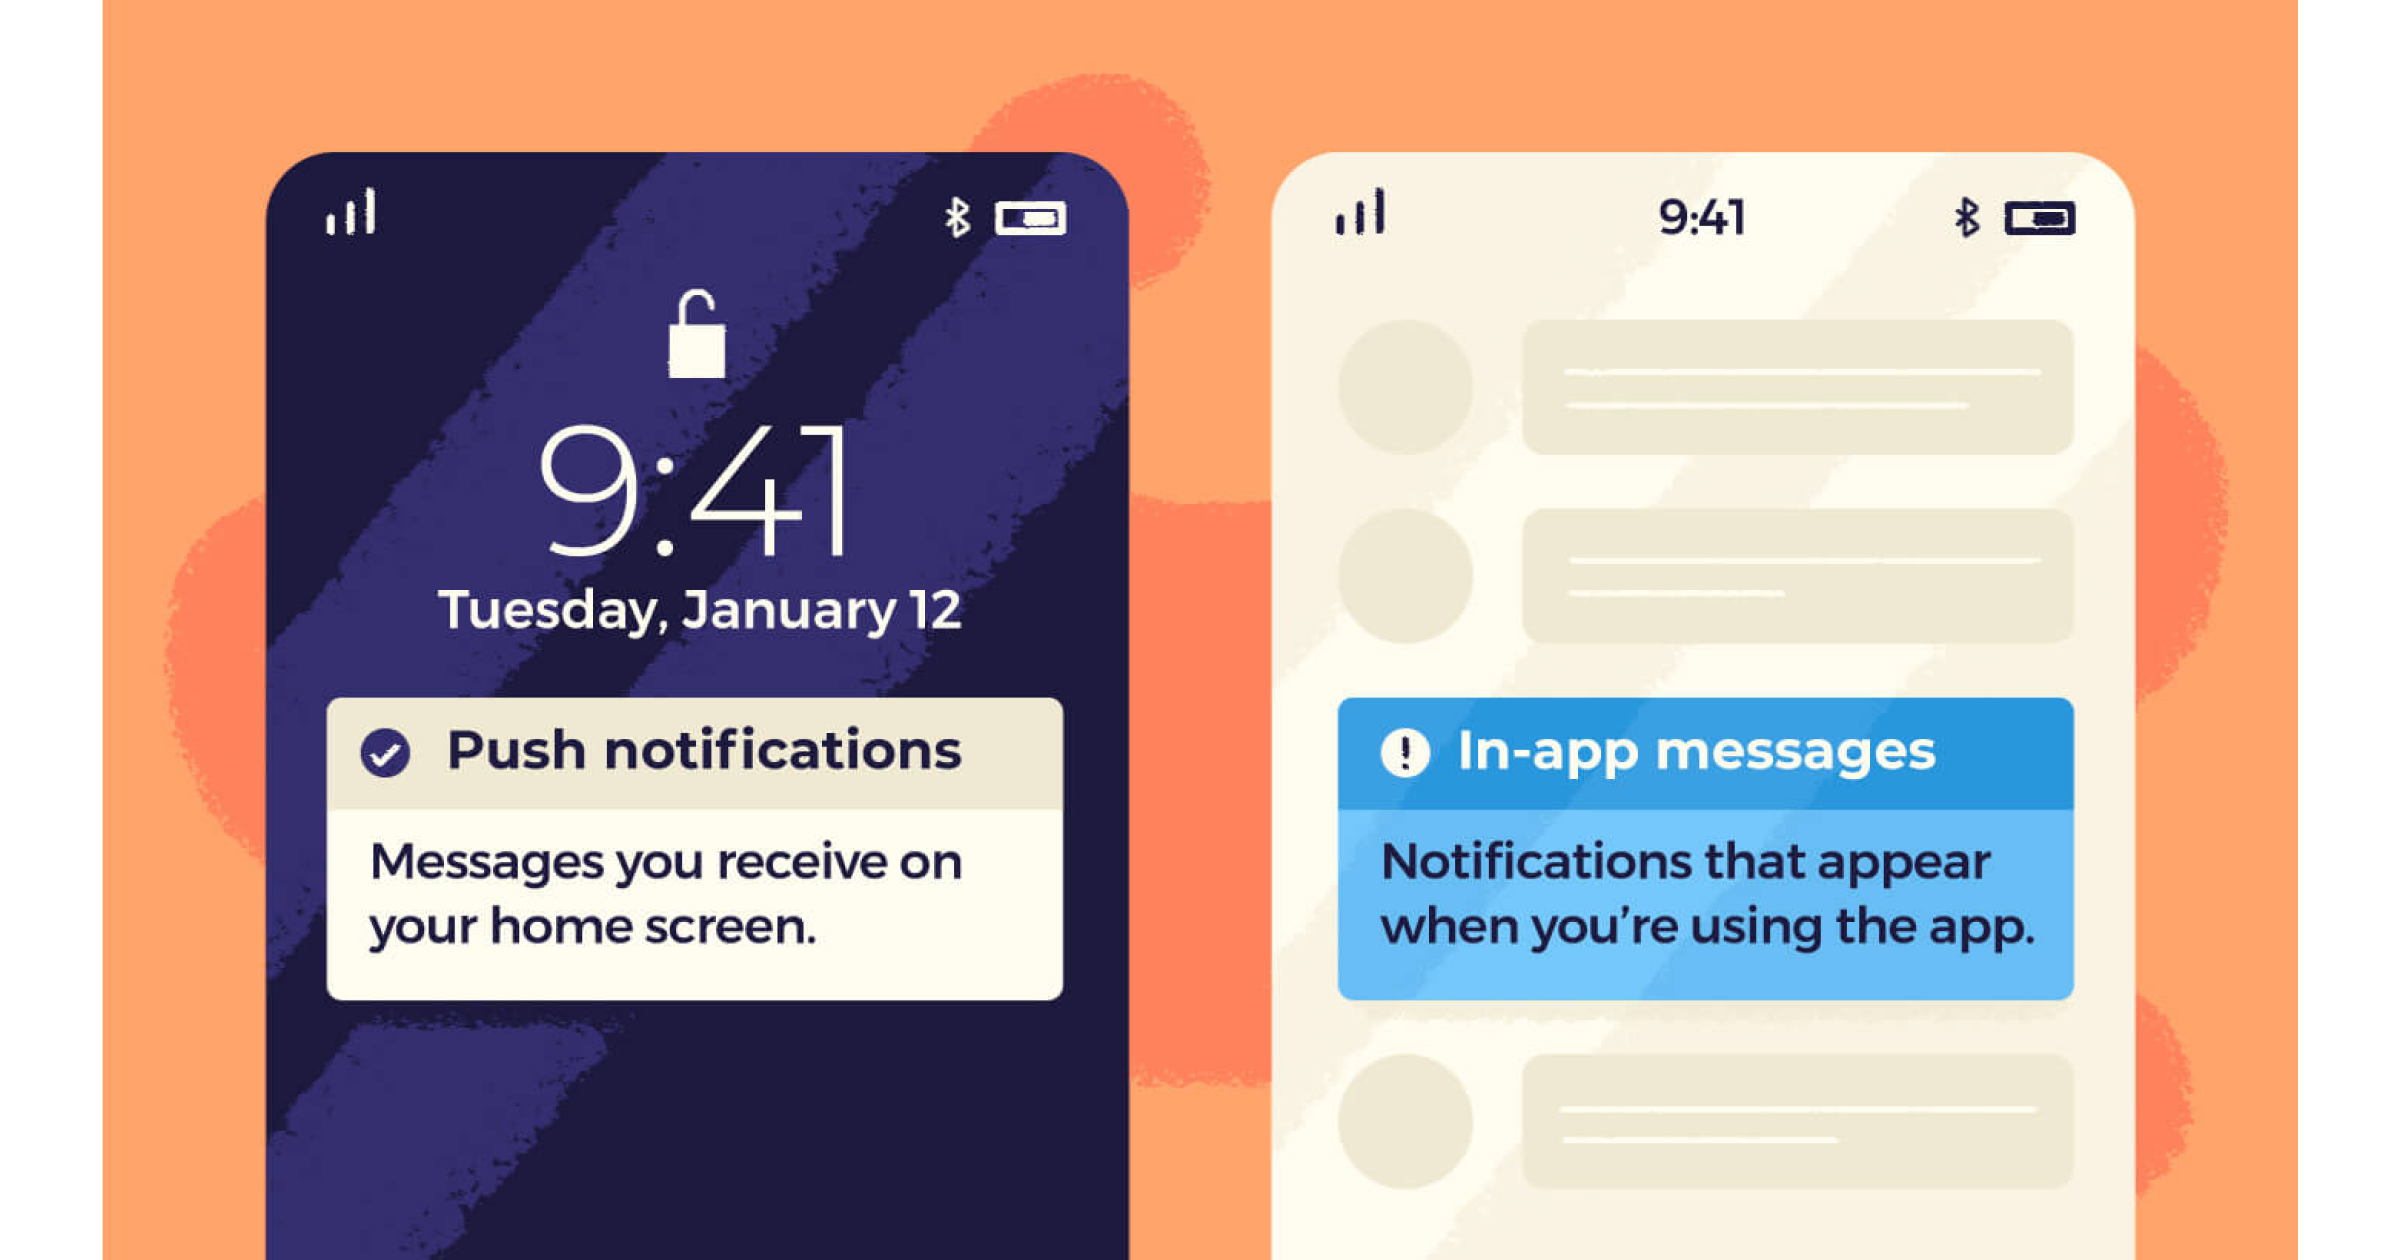 How are pop-ups different from push notifications?